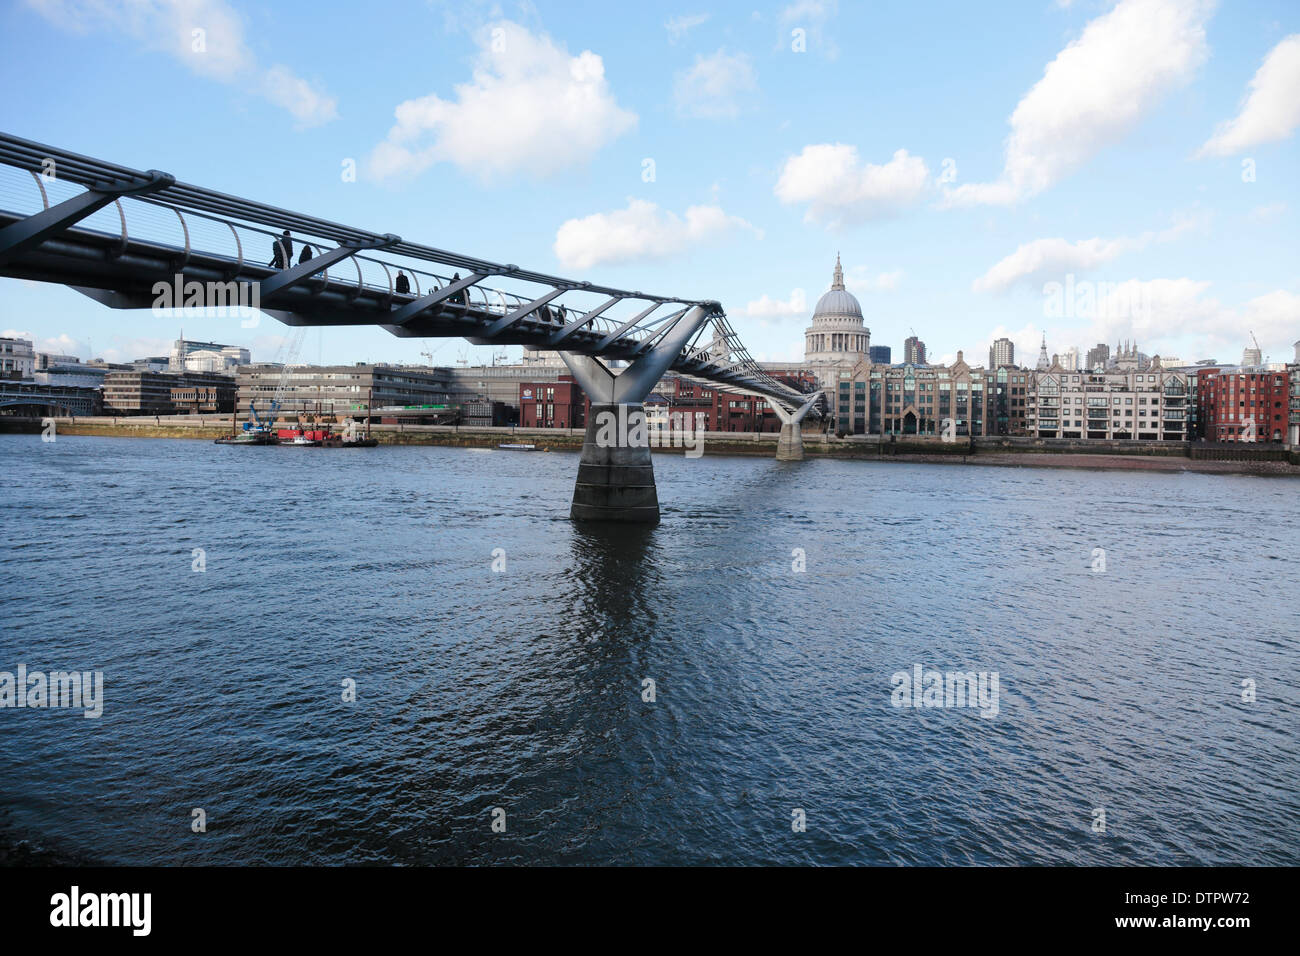 View of the Millennium Bridge with St Paul's Cathedral in the background, London Stock Photo